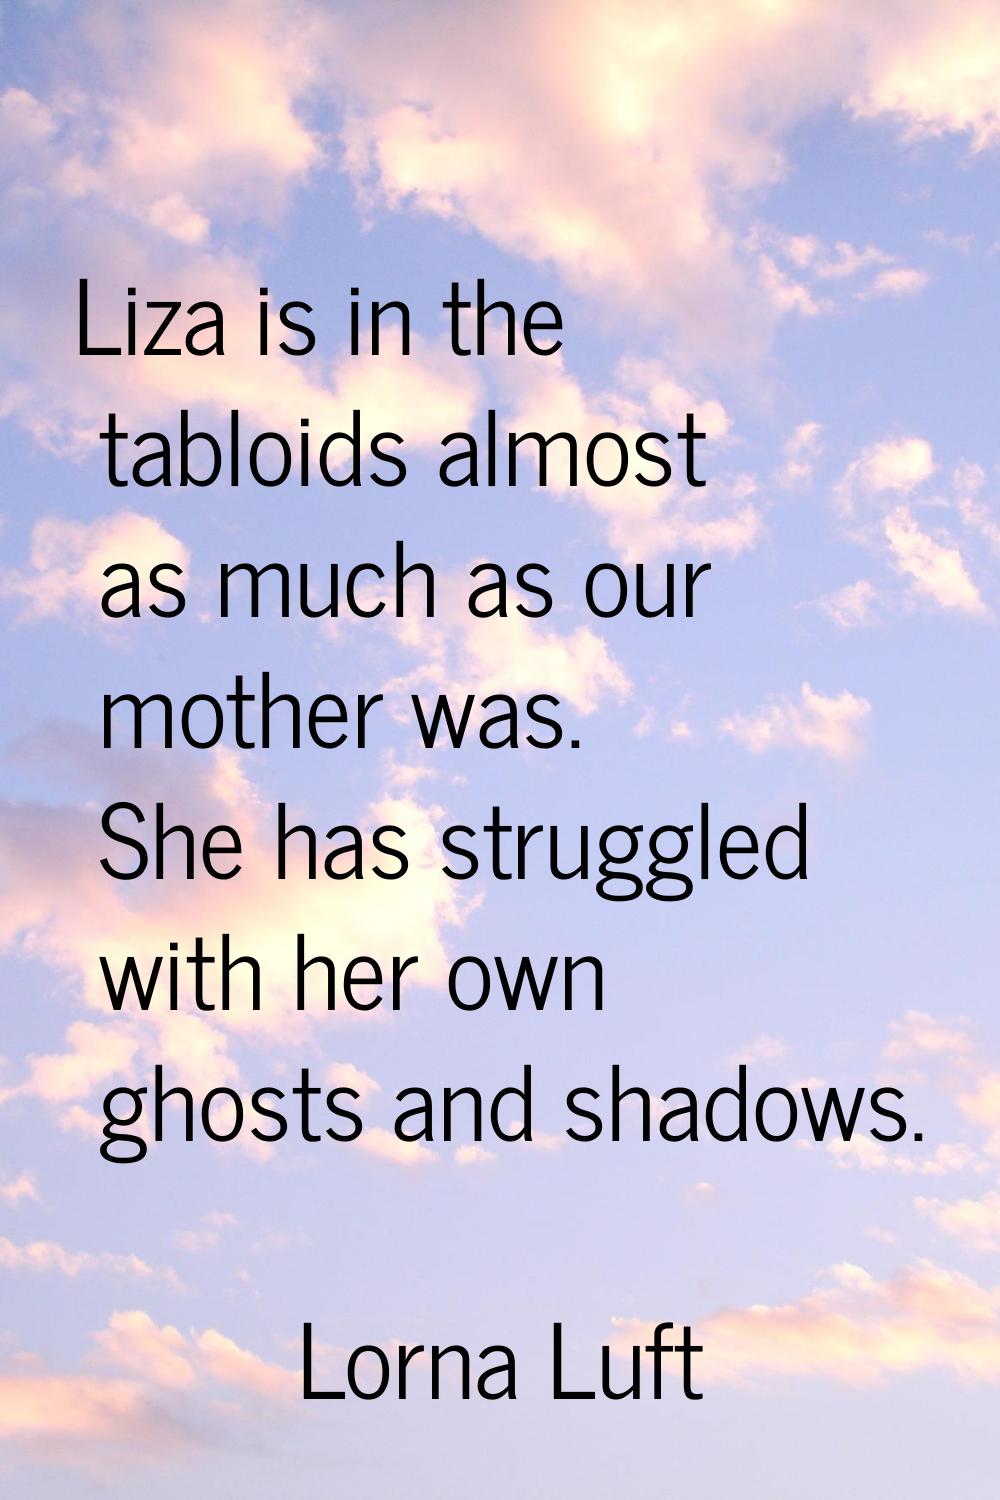 Liza is in the tabloids almost as much as our mother was. She has struggled with her own ghosts and